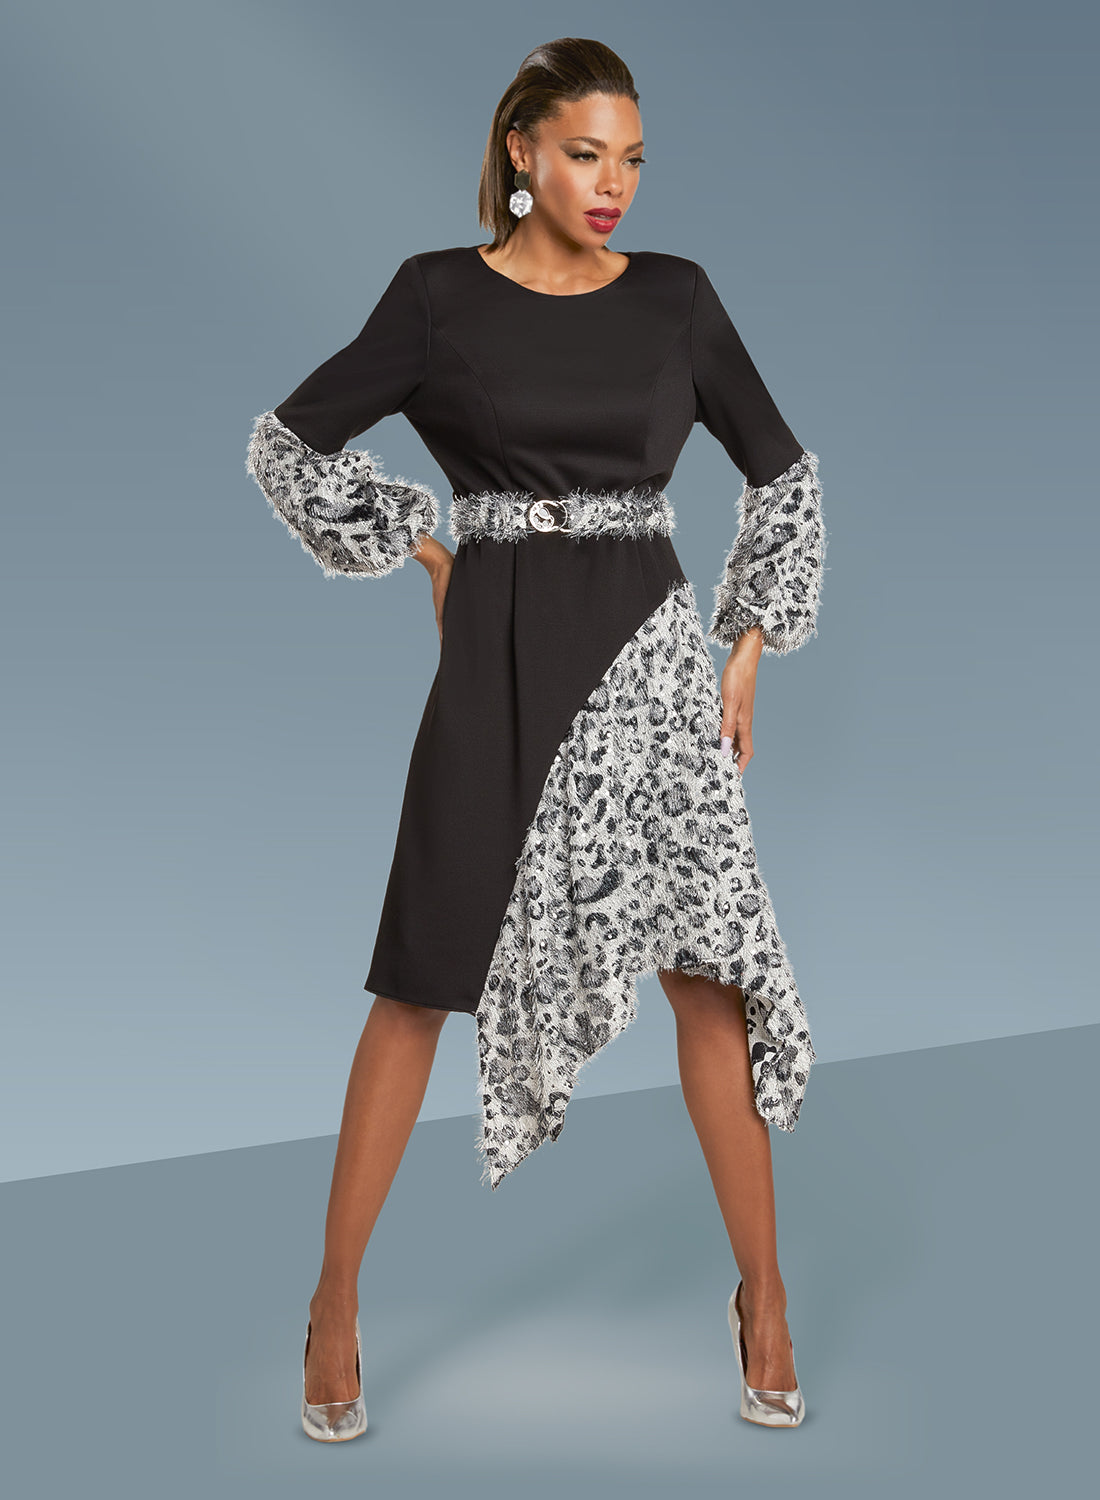 Love The Queen 17405 - Stretch Fabric Dress with Novelty Animal Print Accents